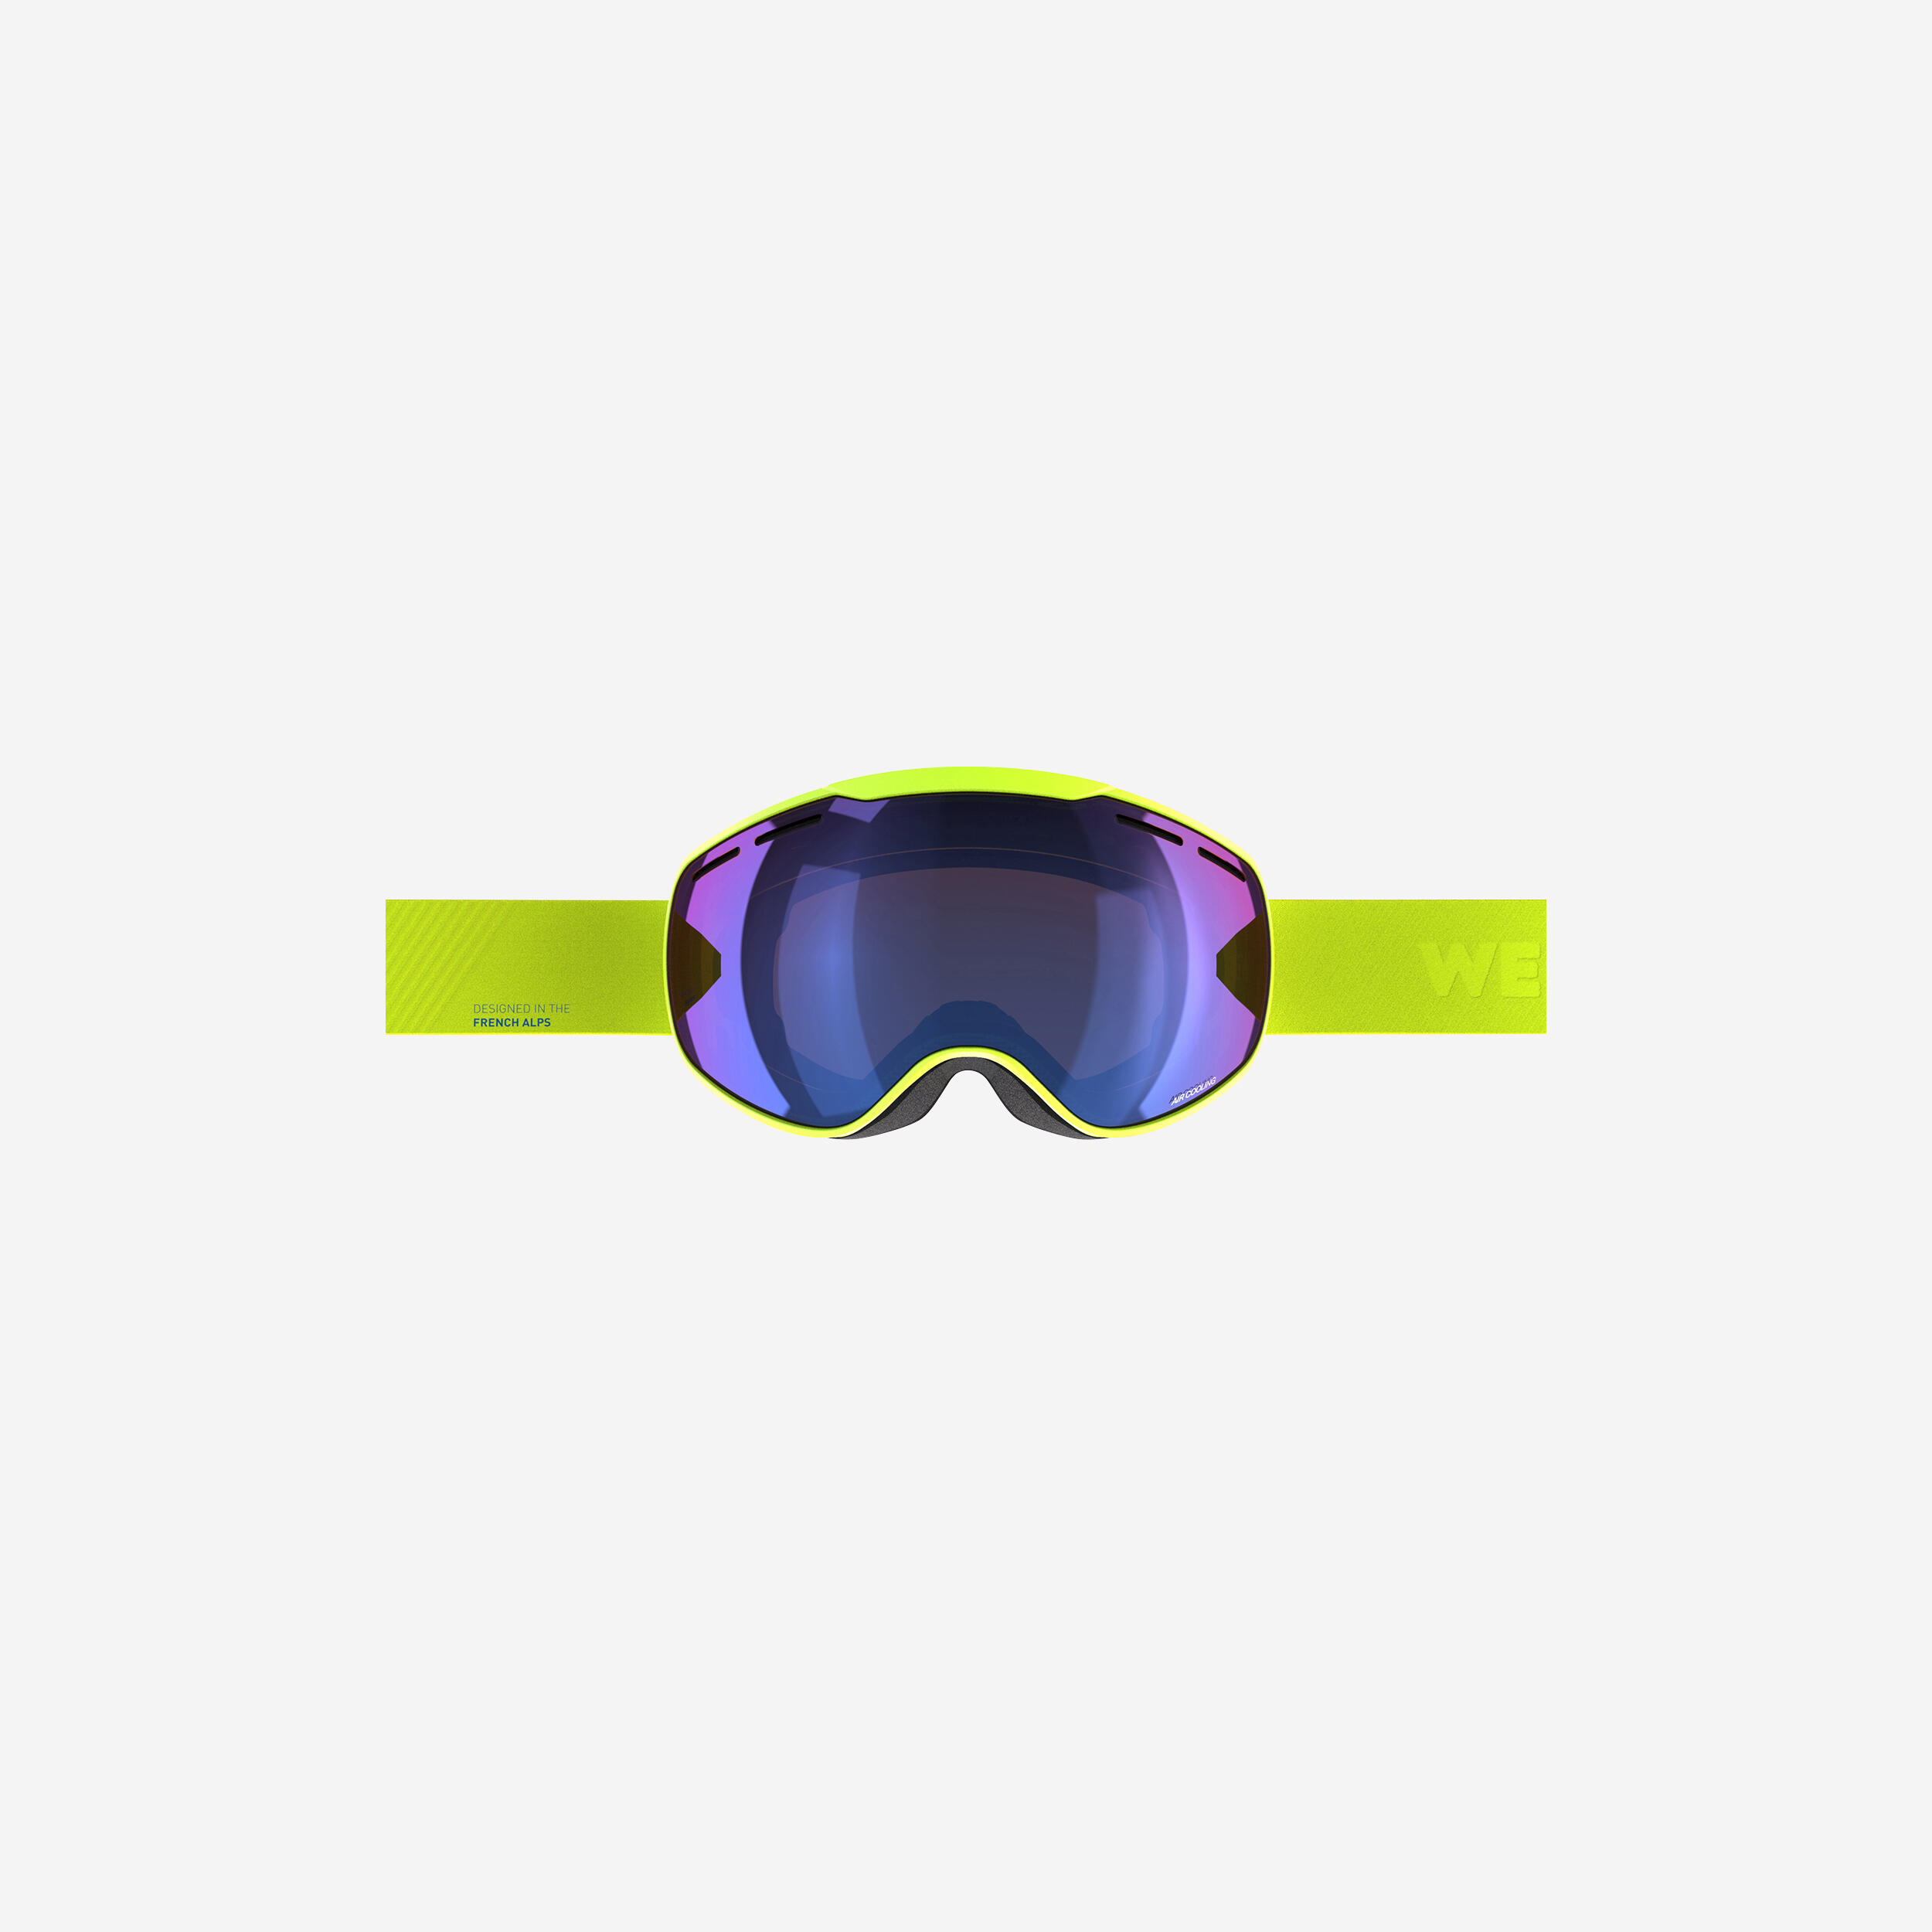 WEDZE KIDS’ AND ADULT SKIING AND SNOWBOARDING GOGGLES GOOD WEATHER - G 900 S3 - YELLOW